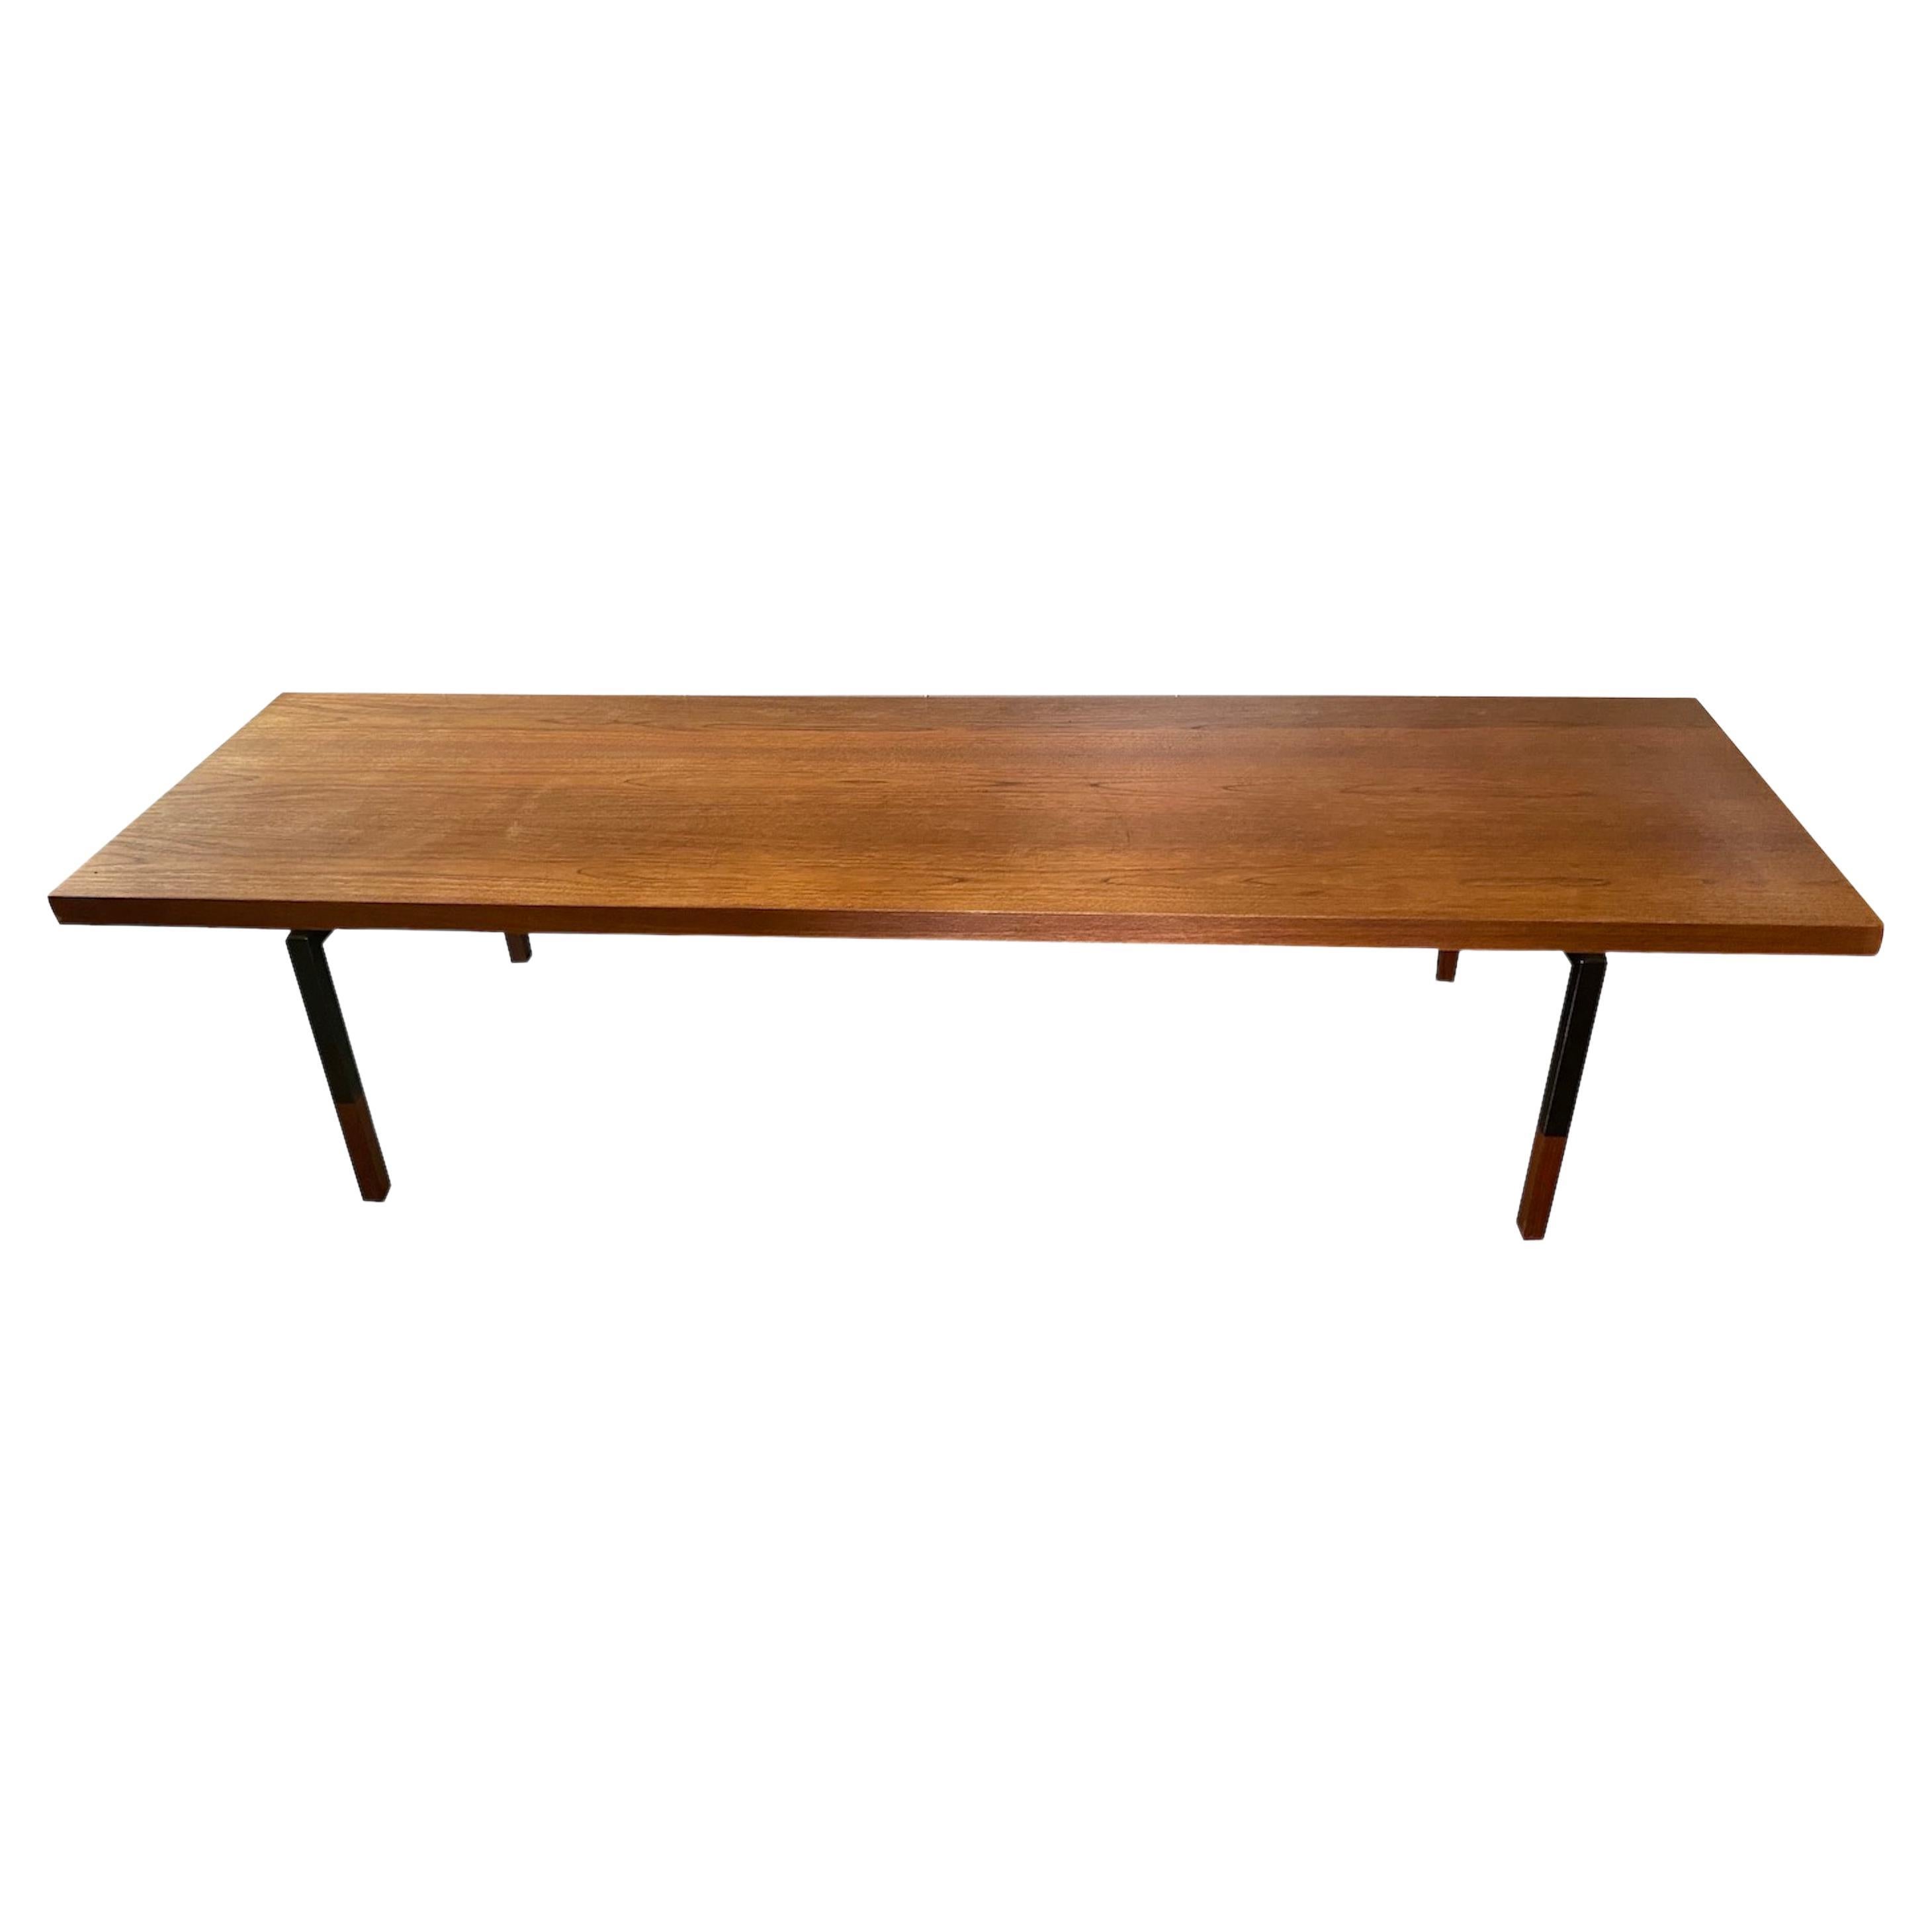 Wood and Steel Mid-Century Table or Bench, Denmark, 1950's For Sale